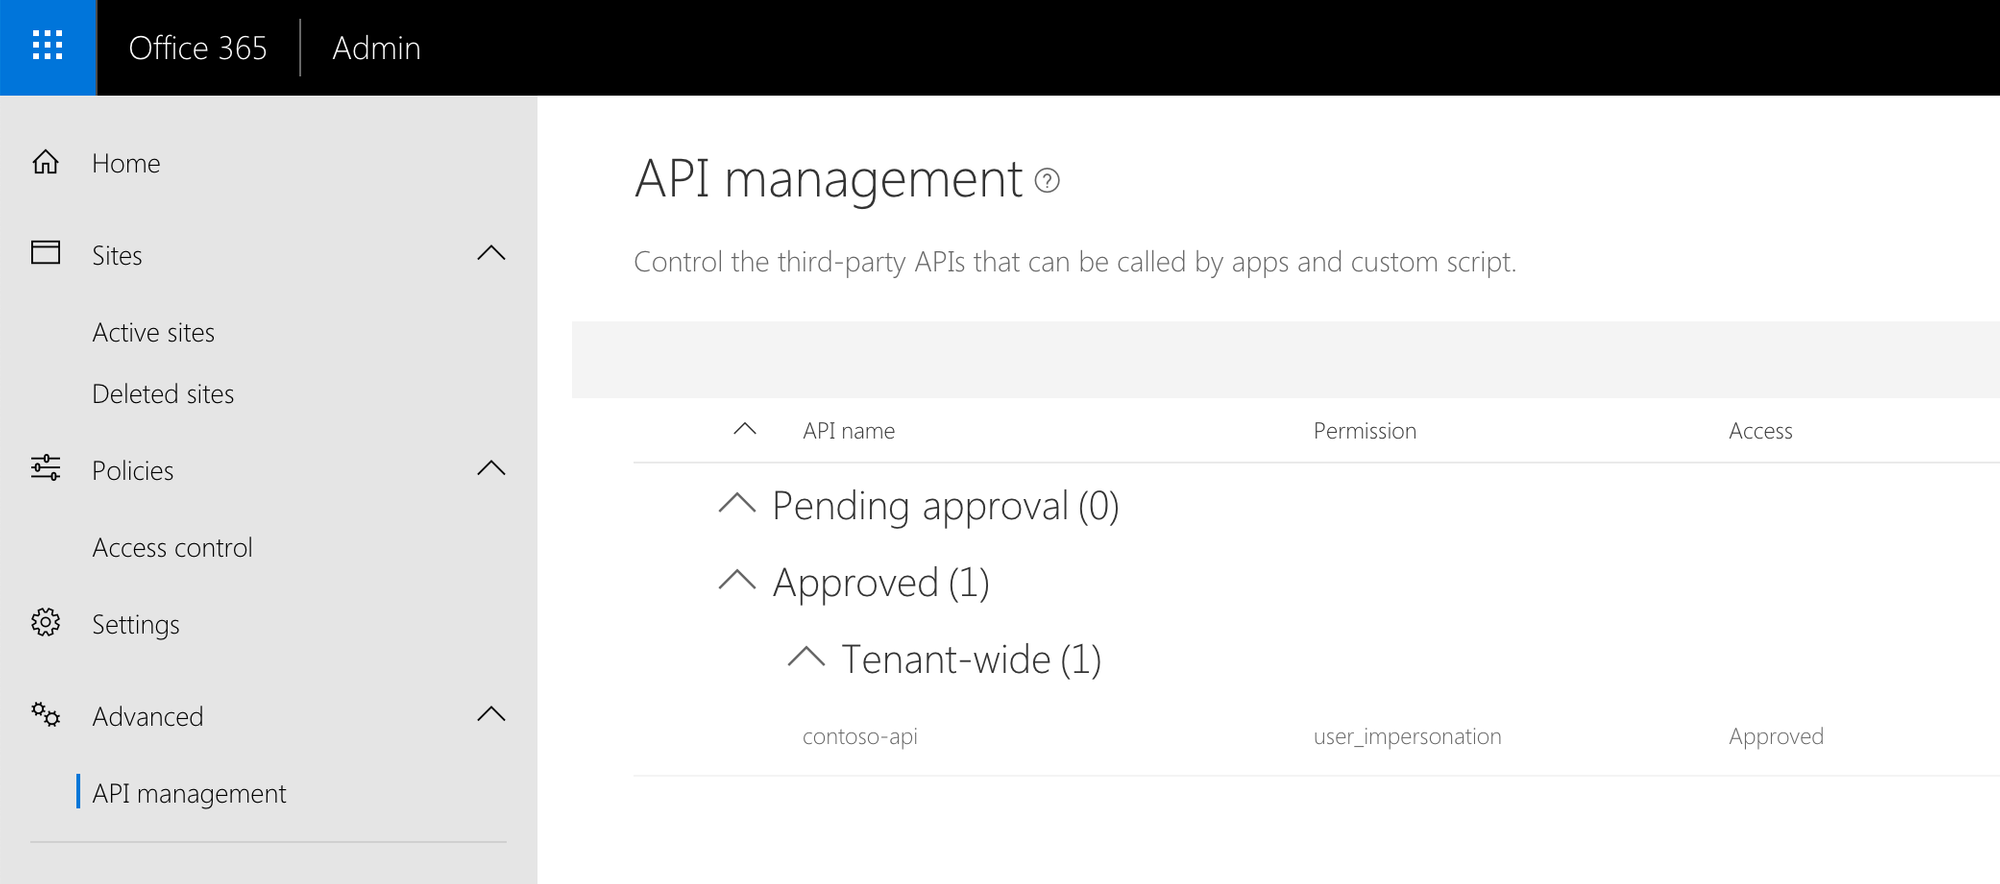 API permission listed among the tenant-wide granted permissions